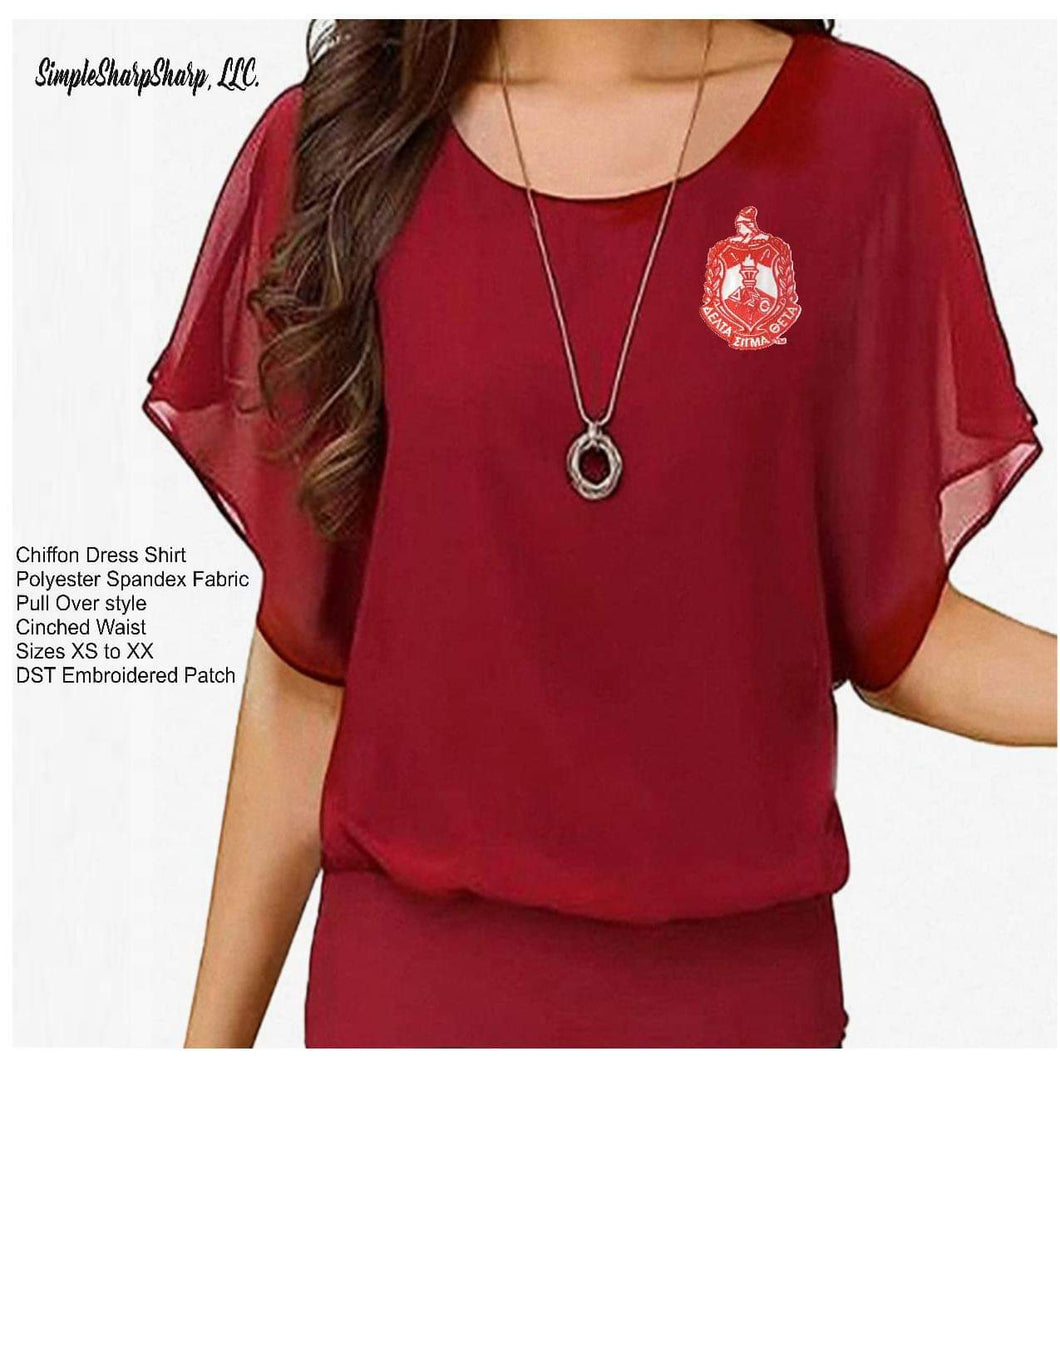 Red Chiffon Dress Top with DST Embroidered Shield